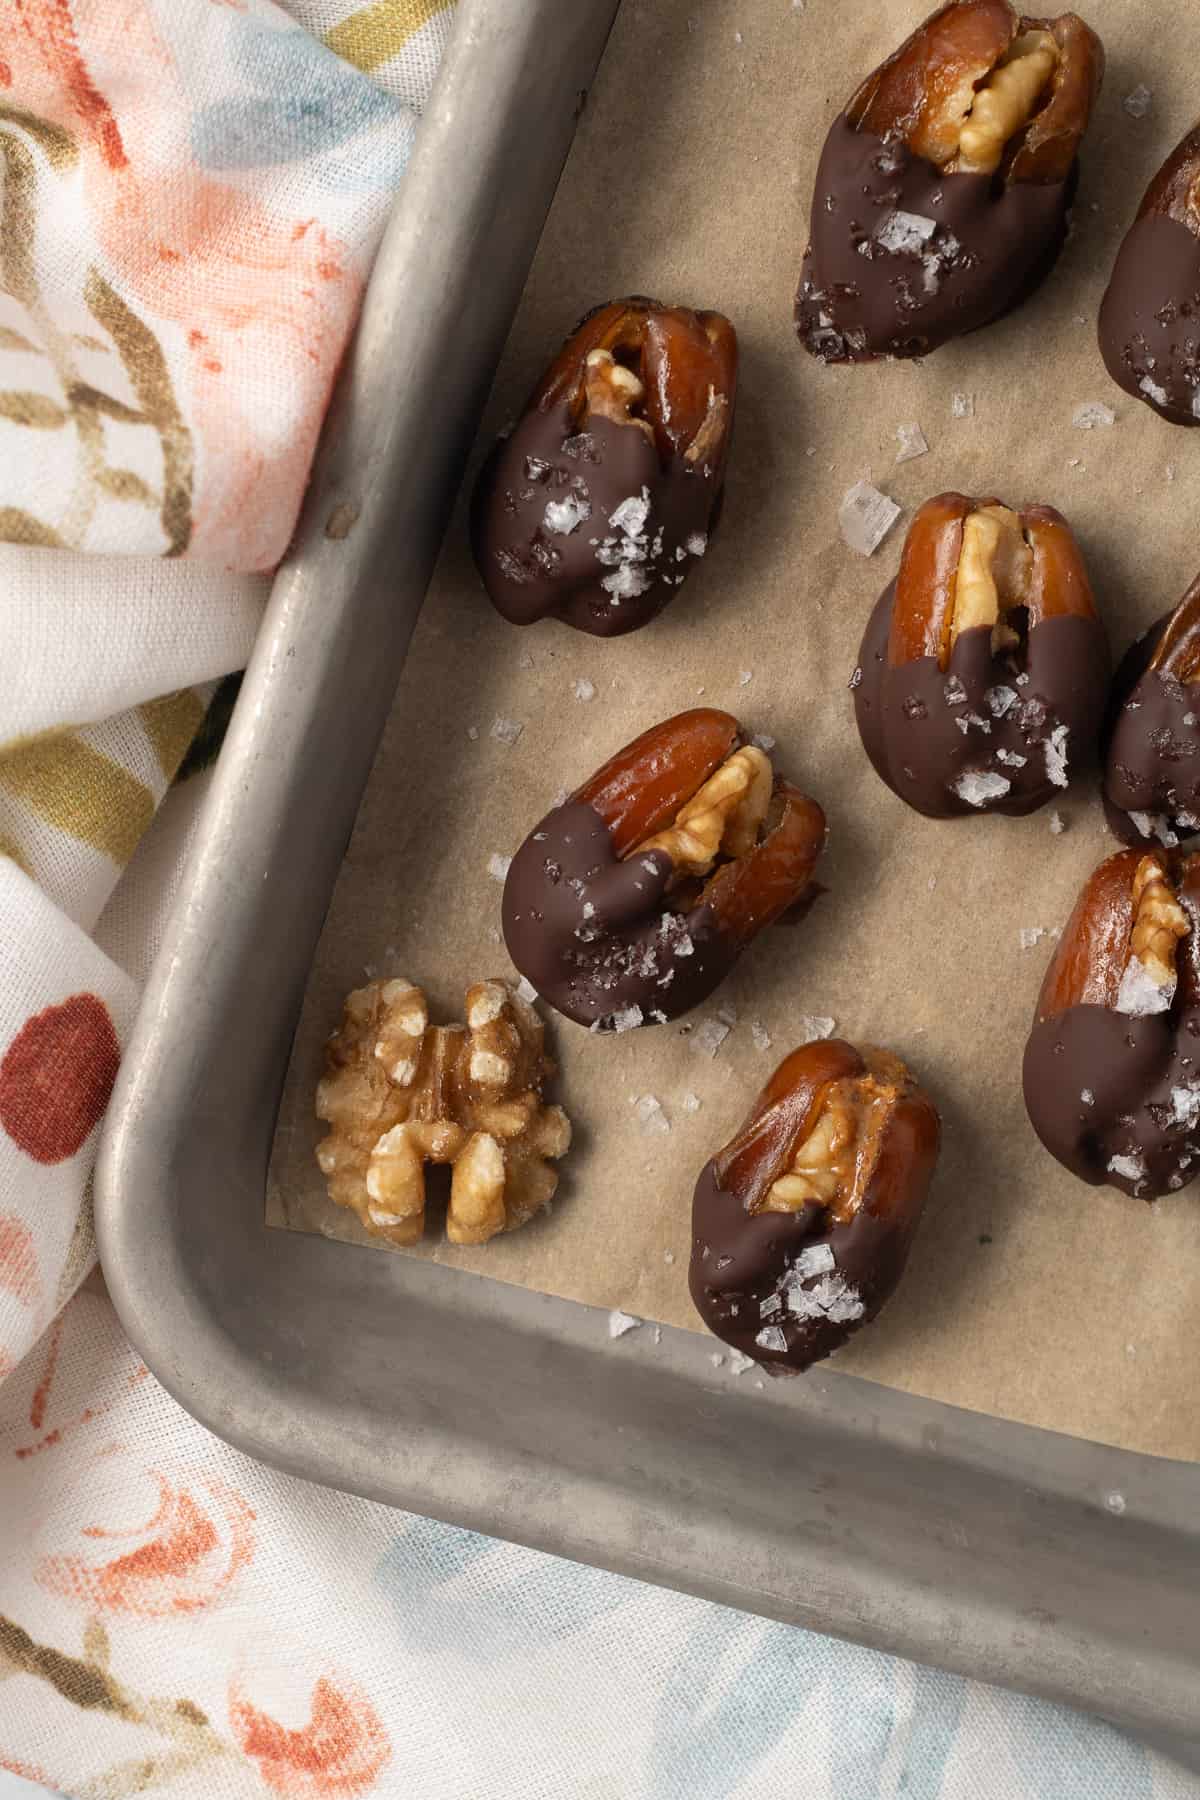 Chocolate dipped walnut stuffed dates on a baking sheet lined with parchment paper.